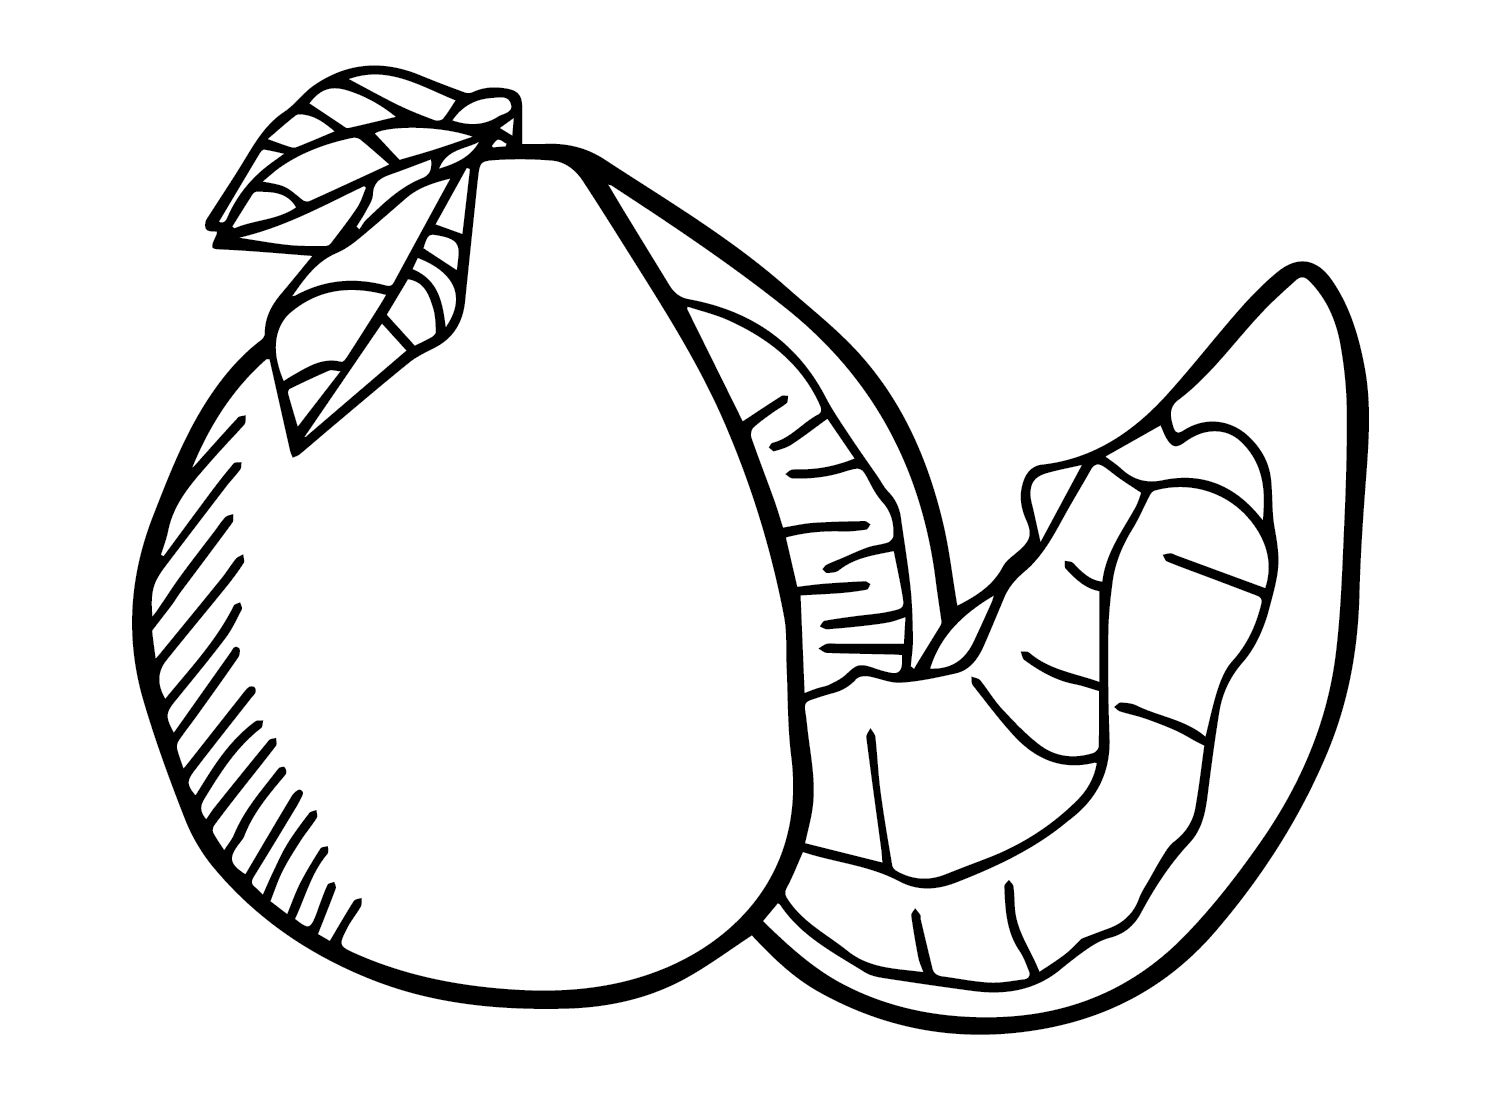 Pomelo color Sheets Coloring Page